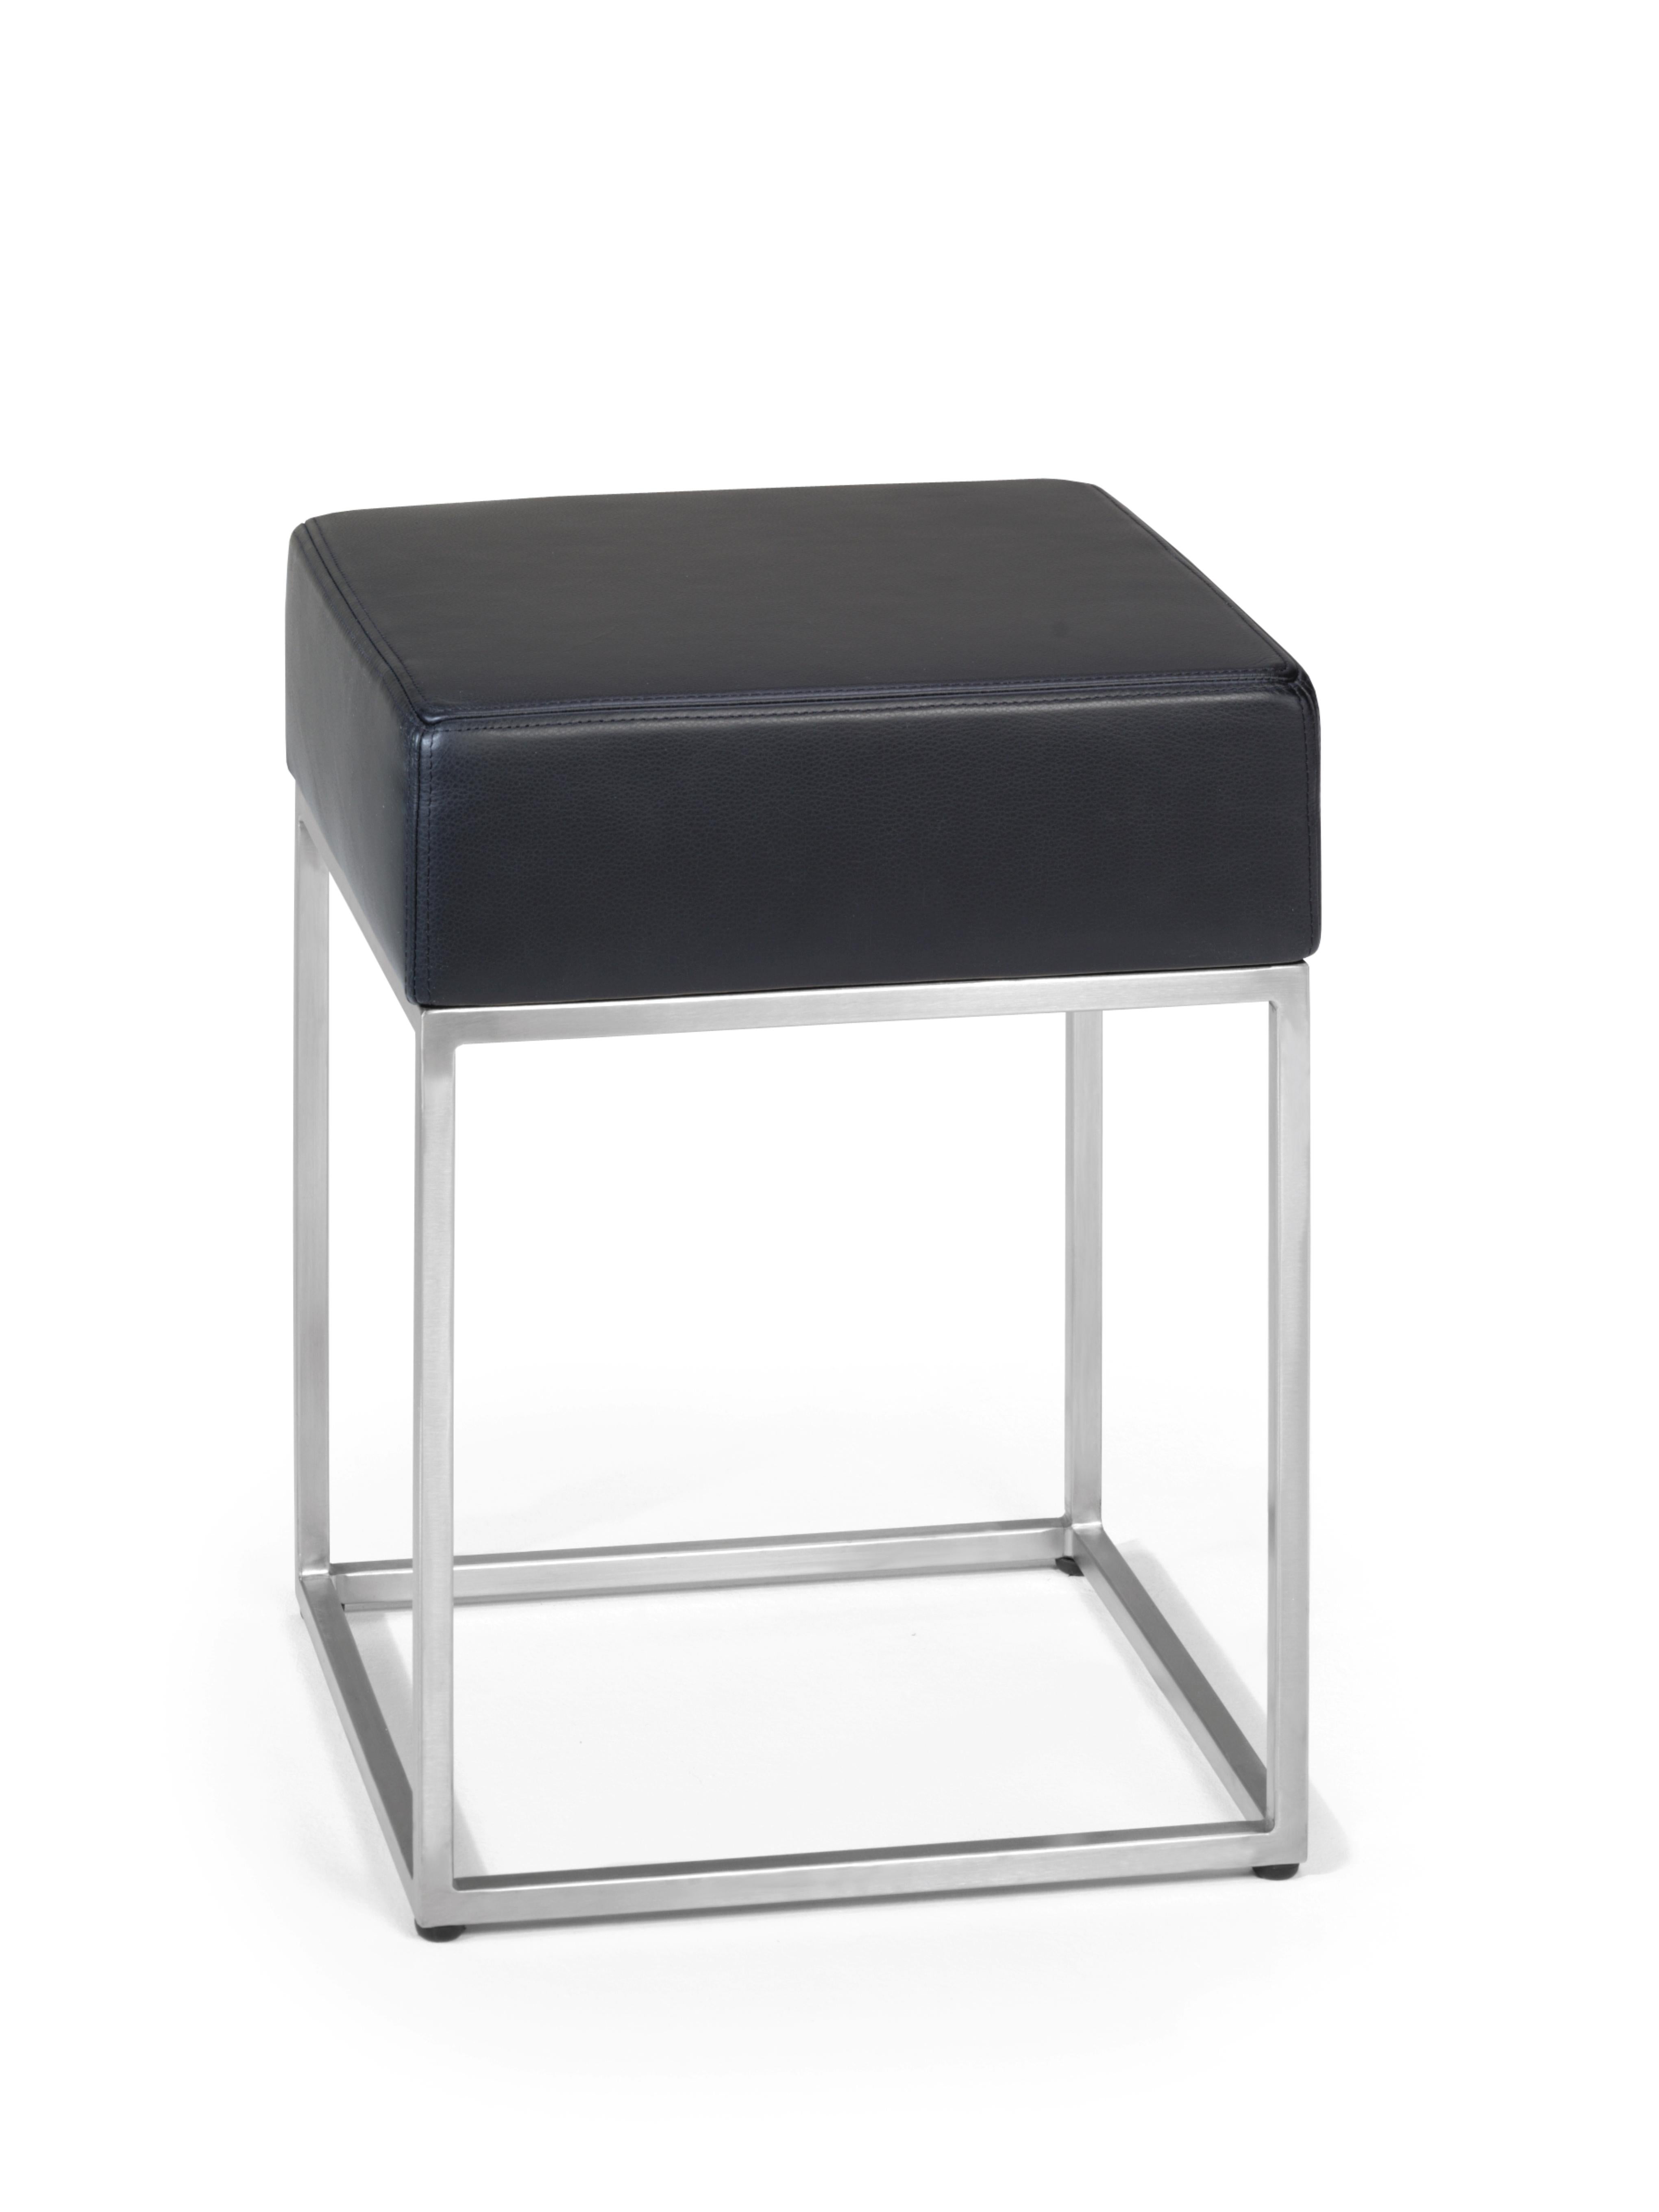 DS-218 stool by De Sede
Dimensions: D 38 x W 38 x H 50 cm
Materials: steel, leather

Prices may change according to the chosen materials and size. 

Plays a decisive role in moulding the character of a room. A focus on clear-cut structures,